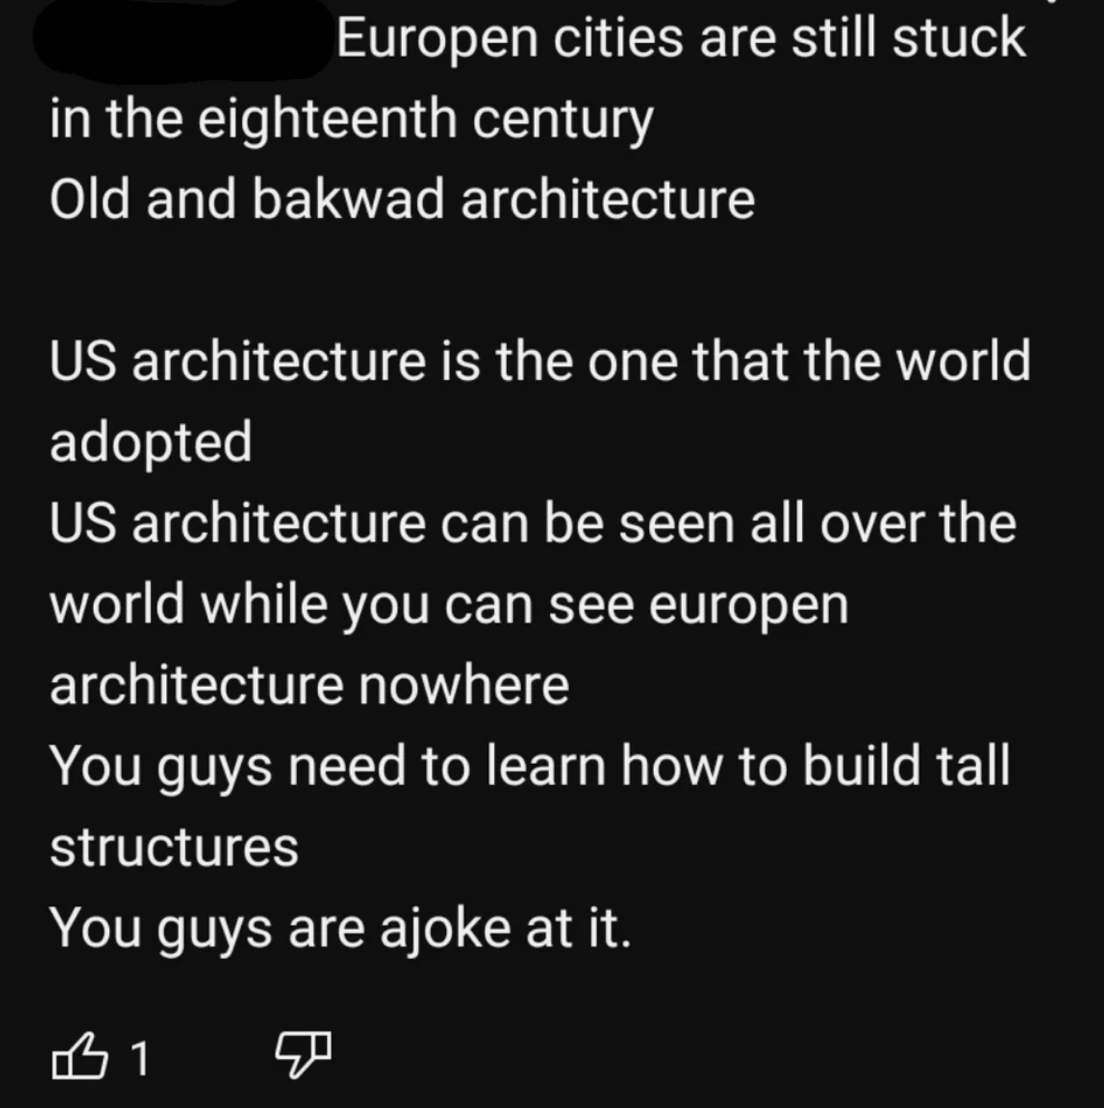 post claims european cities are stuck in the past in terms of architecture and that us architecture has been adopted worldwide